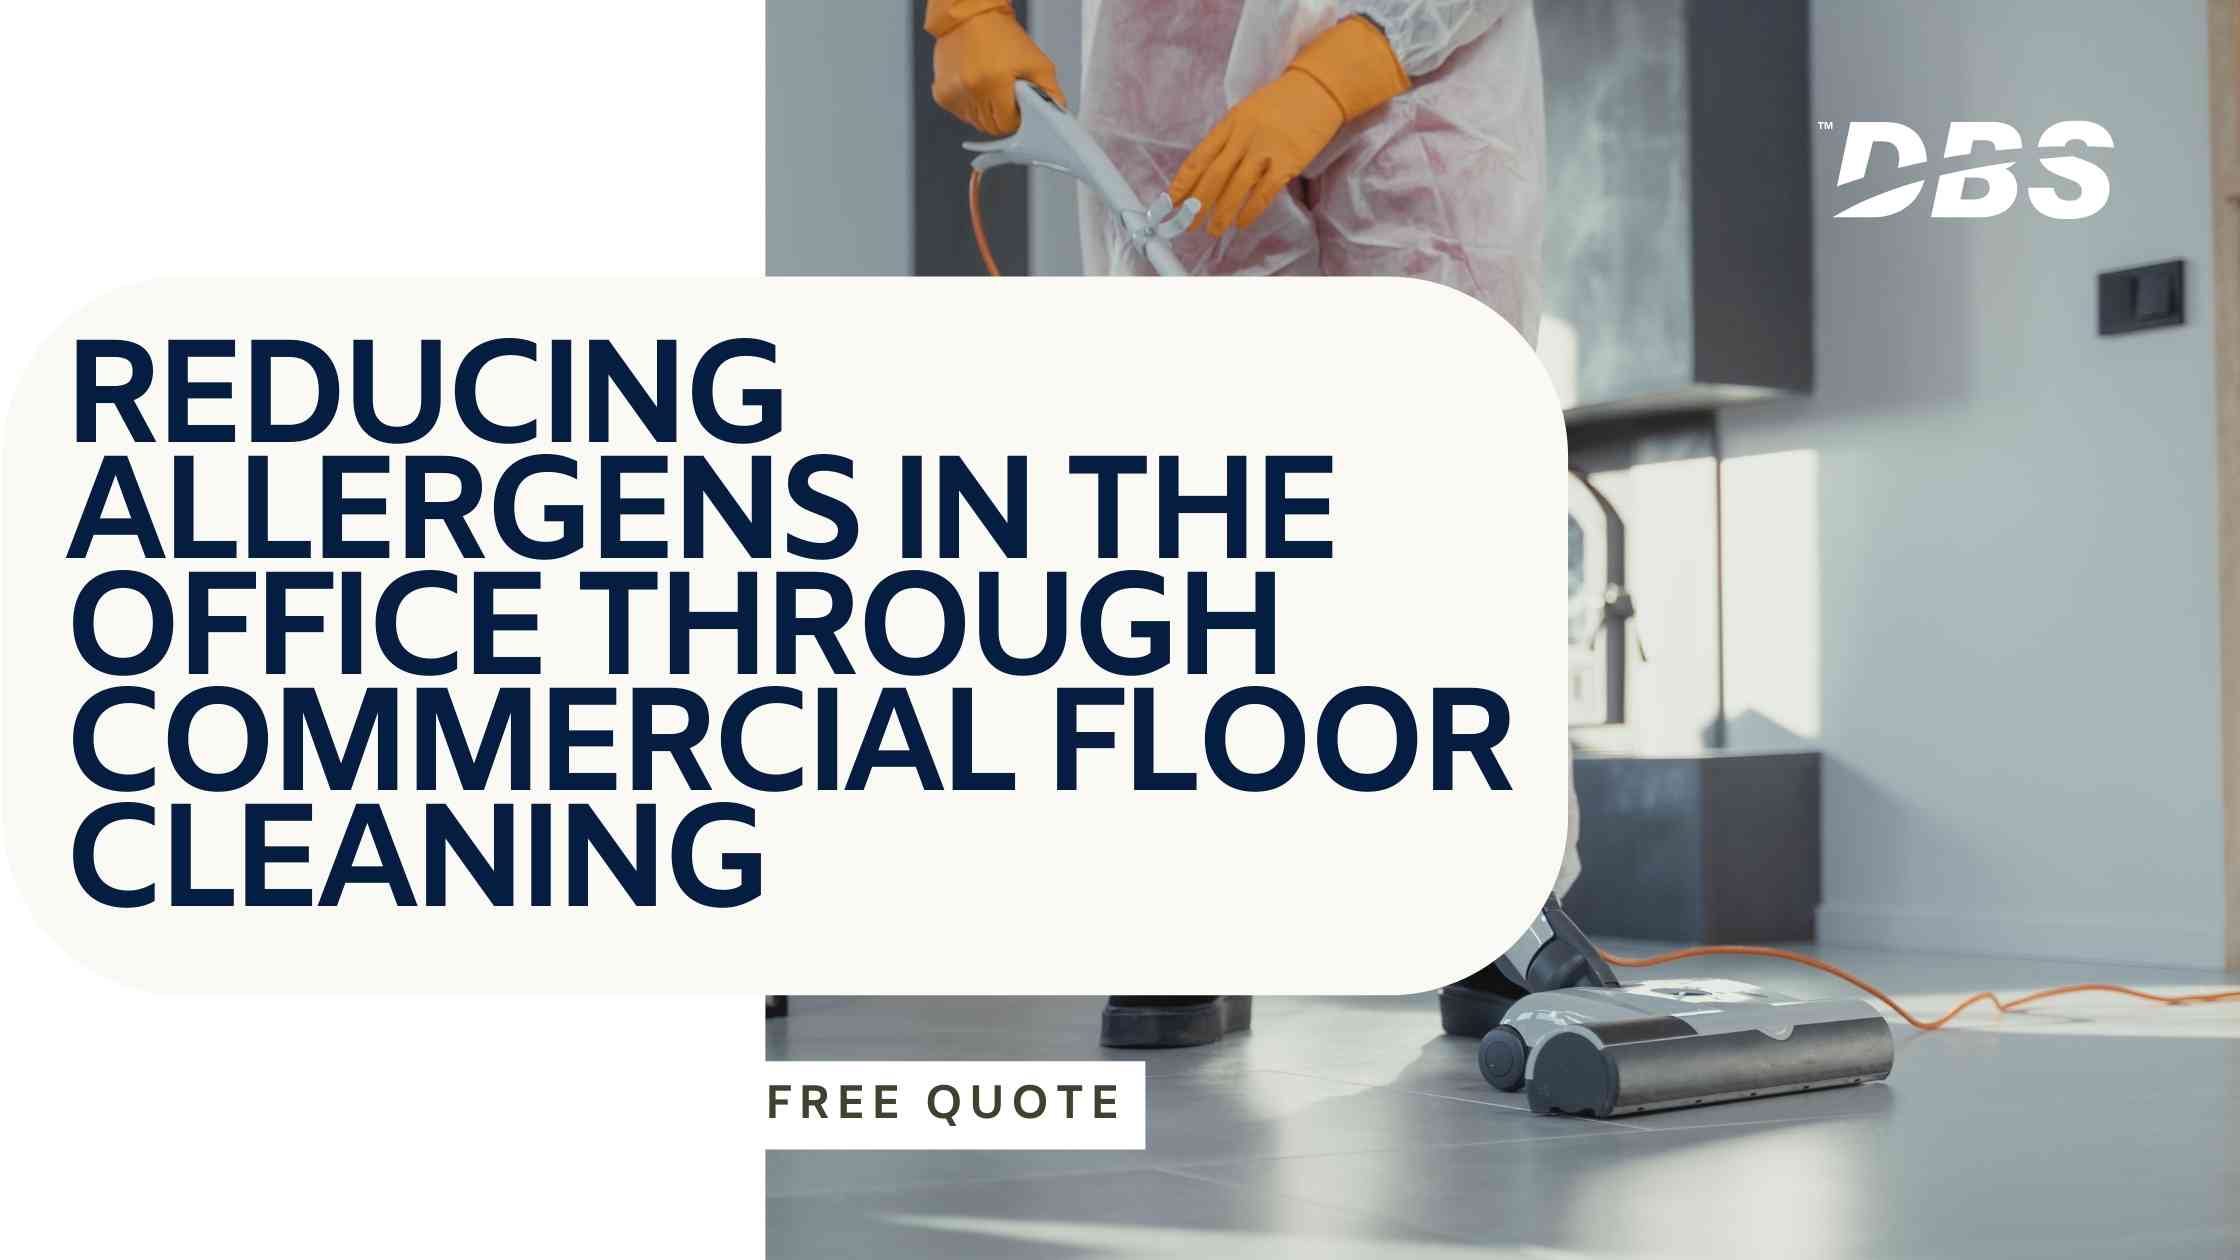 Reducing allergens with commercial floor cleaning